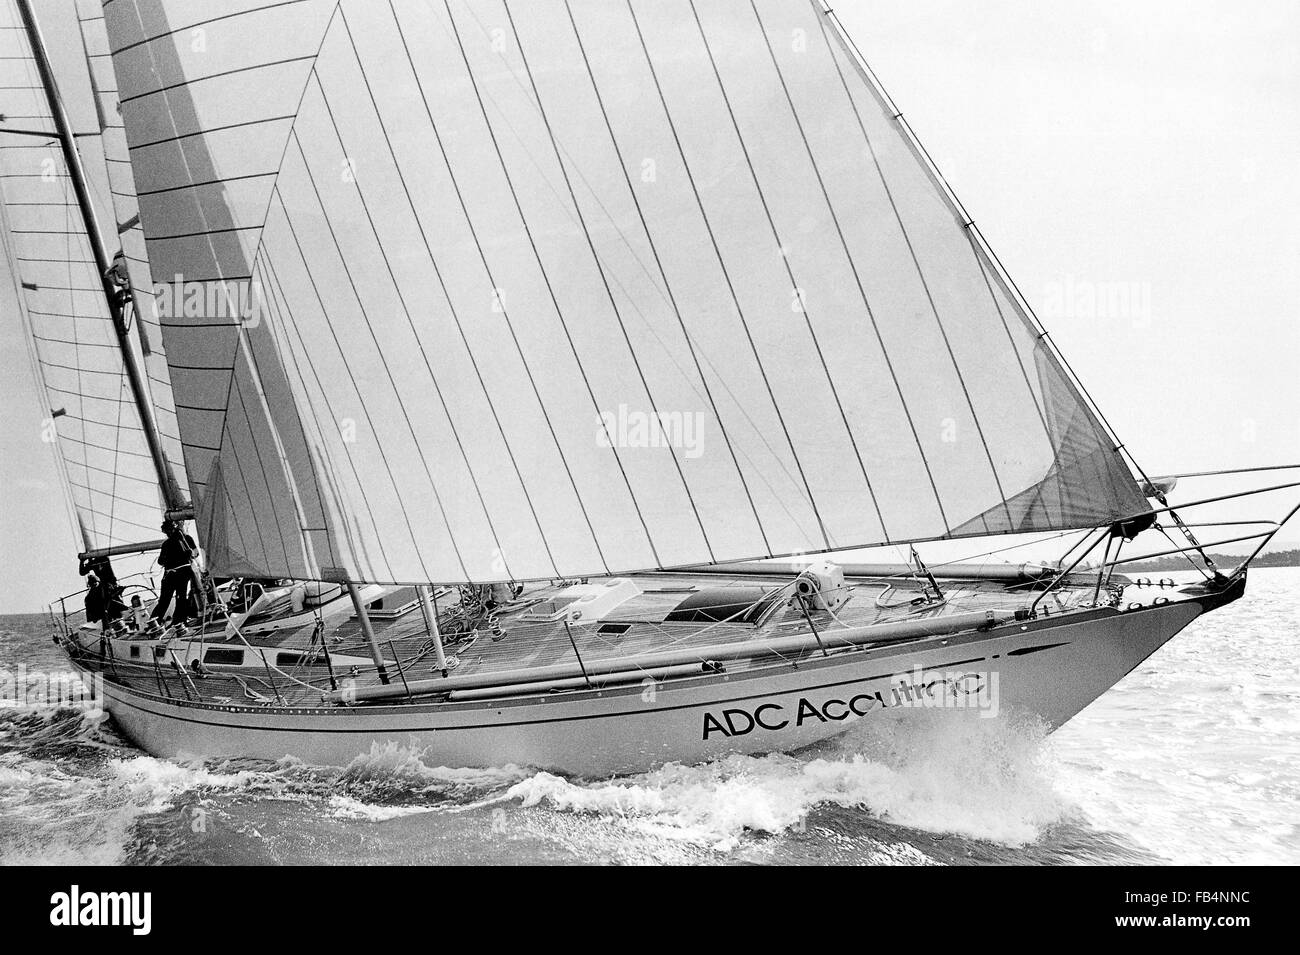 AJAX NEWS PHOTOS - 1977. SOLENT, ENGLAND. - WHITBREAD RACE ENTRY - CLARE FRANCIS (GB) SKIPPERED THE BIG SPARKMAN & STEPHENS DESIGNED 70 FT KETCH ADC ACCUTRAC IN THE 1977/78 WHITBREAD ROUND THE WORLD RACE.  PHOTO:JONATHAN EASTLAND/AJAX  REF:ACCUTRAC 1977 2 Stock Photo